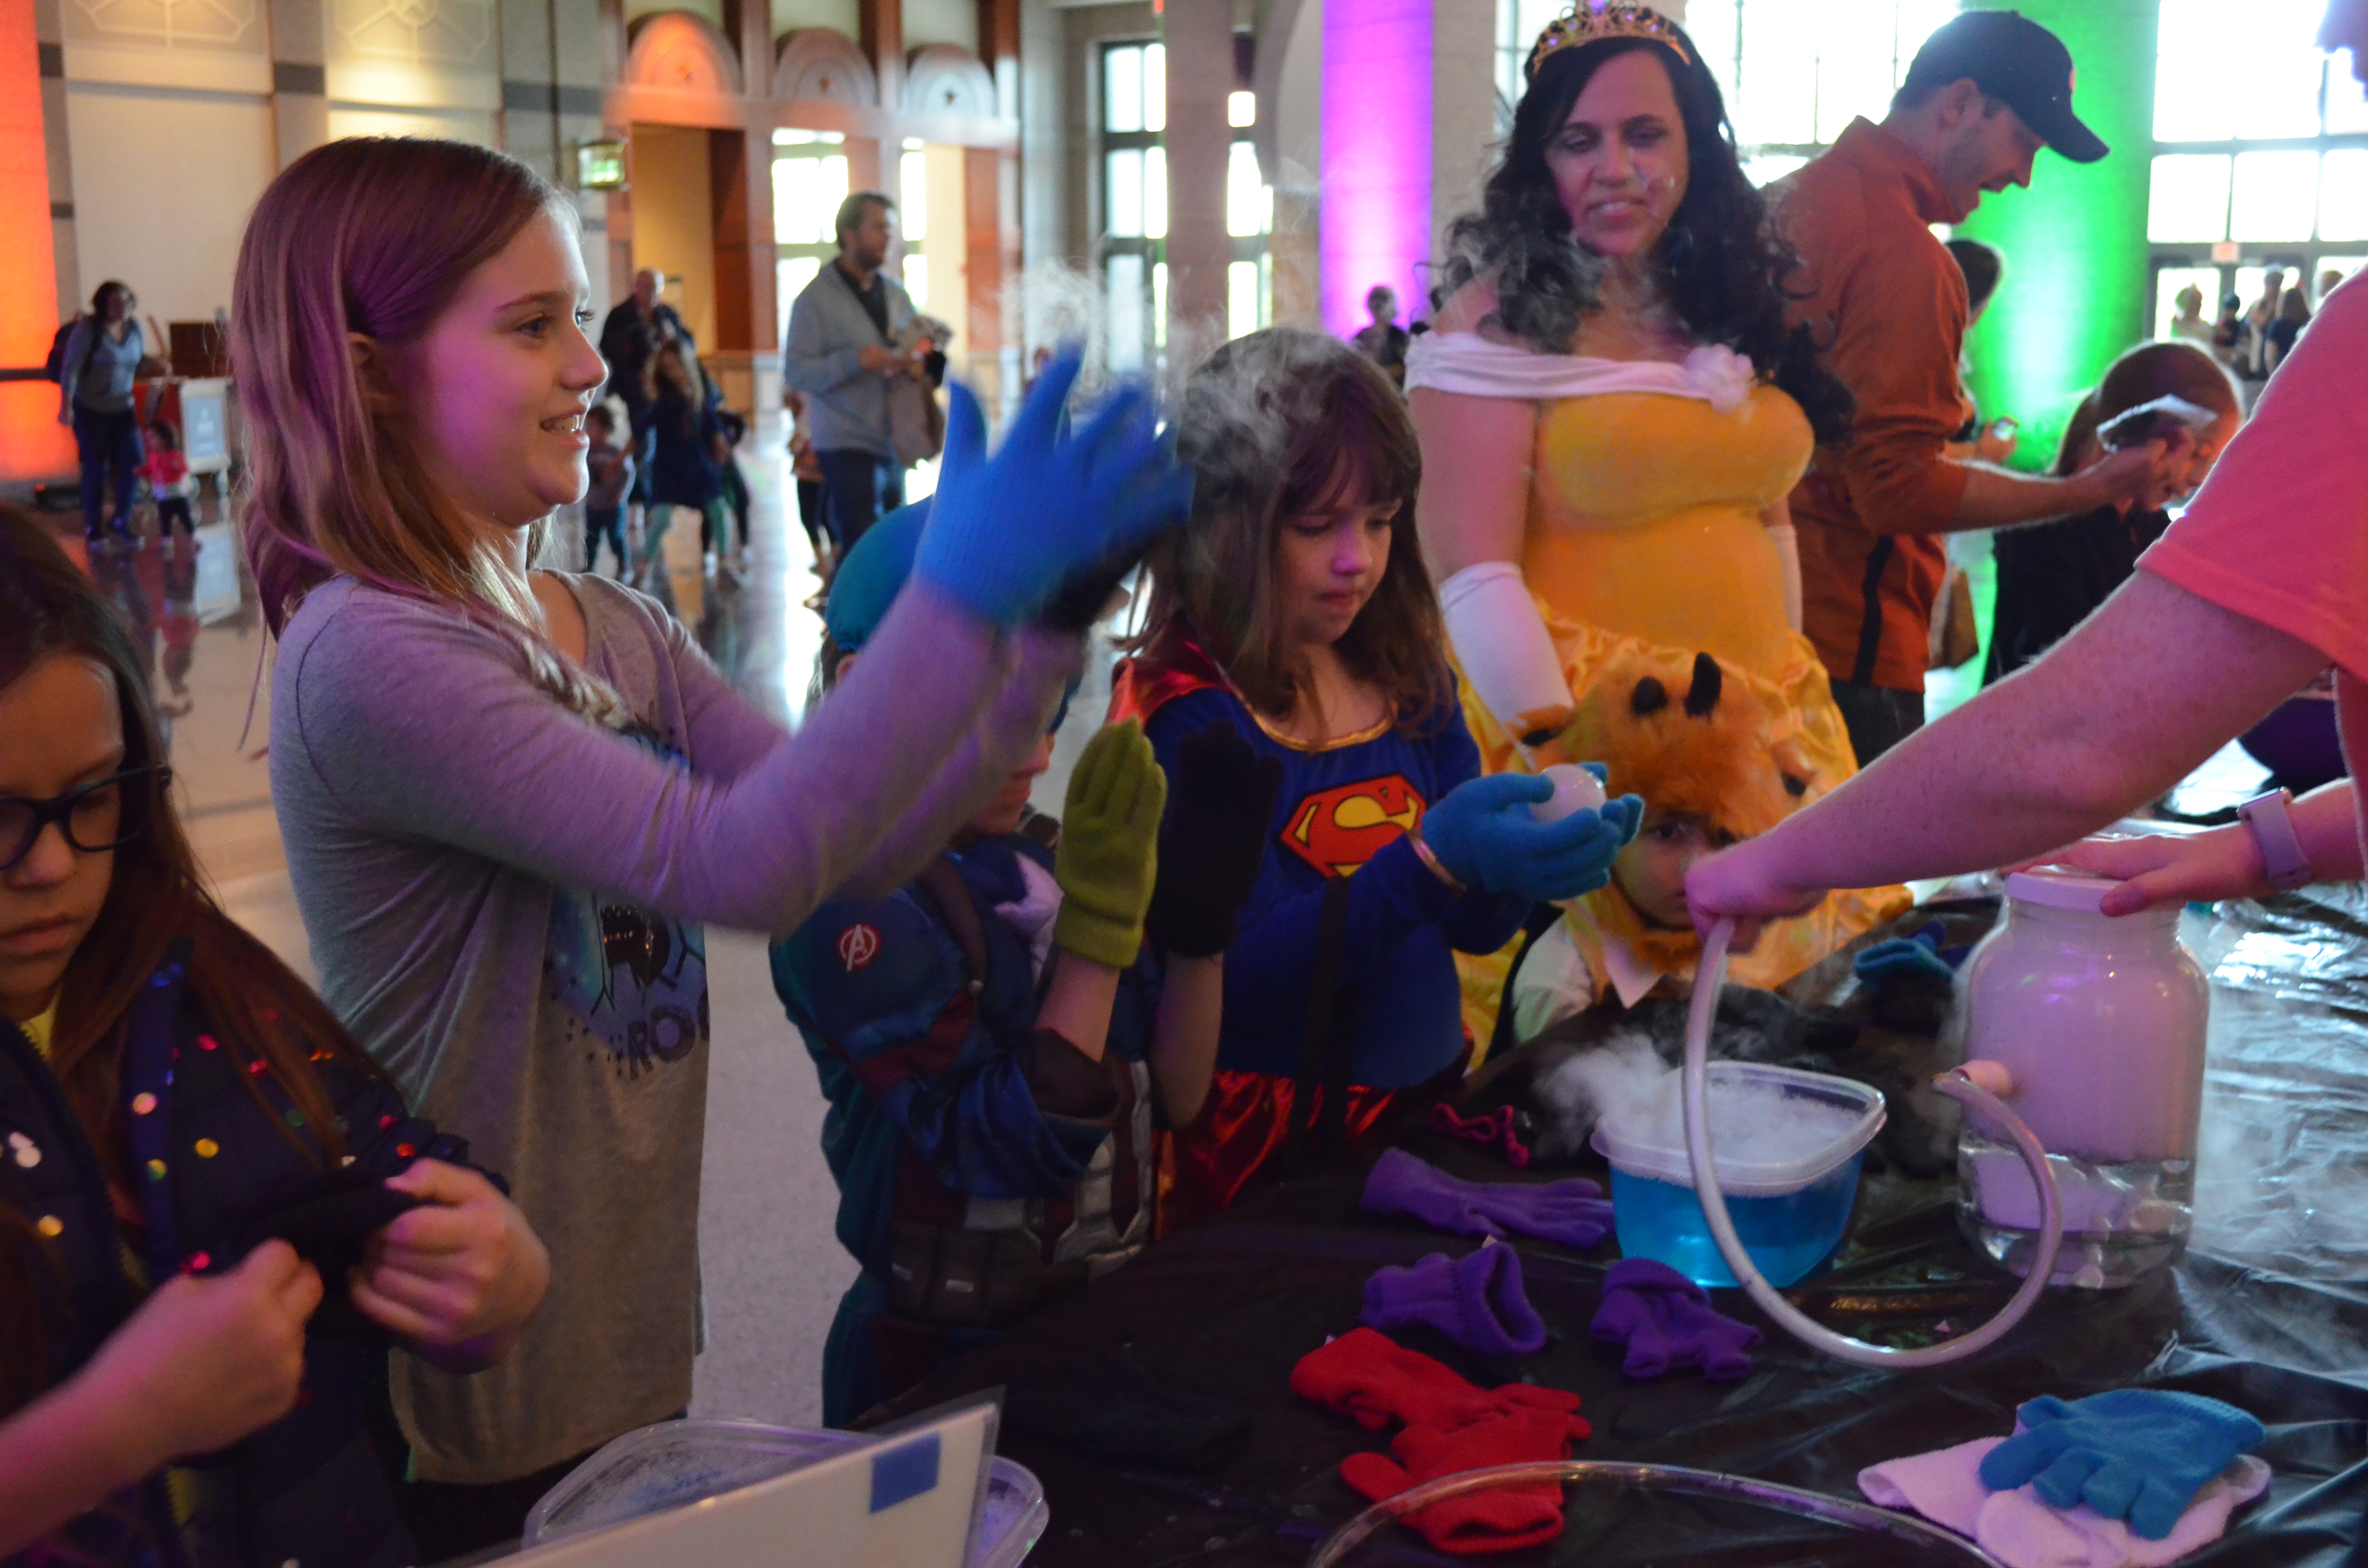 Families are invited to take part in spooky STEM fun on Friday, October 26 at the annual free Spooktacular event hosted by the Bullock Museum and Girlstart.